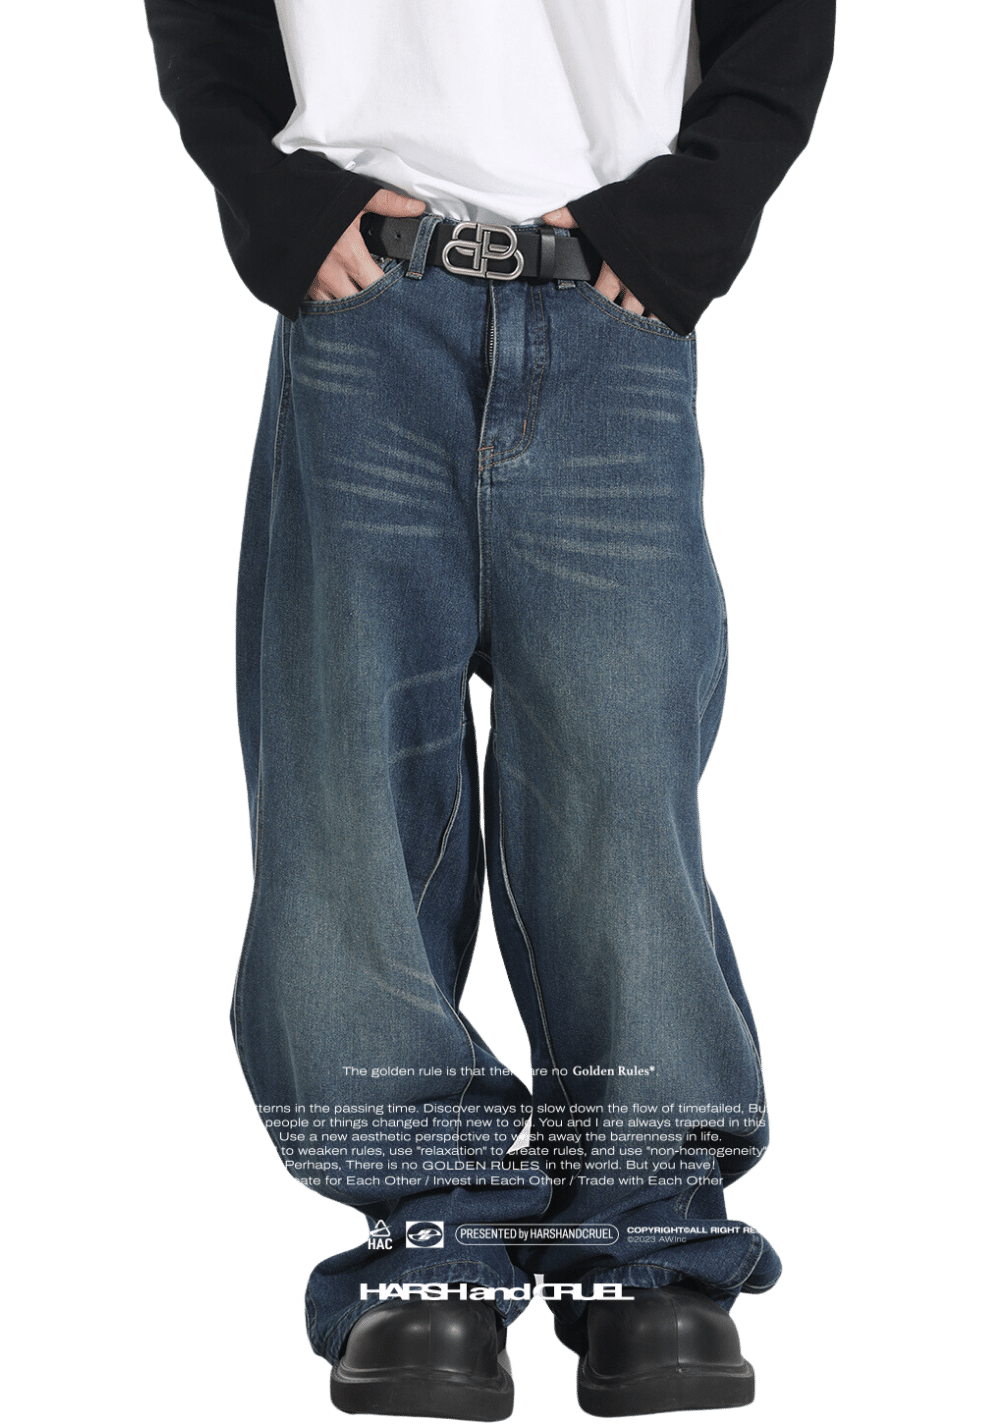 Embroidered Distressed Jeans - PSYLOS 1, Embroidered Distressed Jeans, Pants, HARSH AND CRUEL, PSYLOS 1